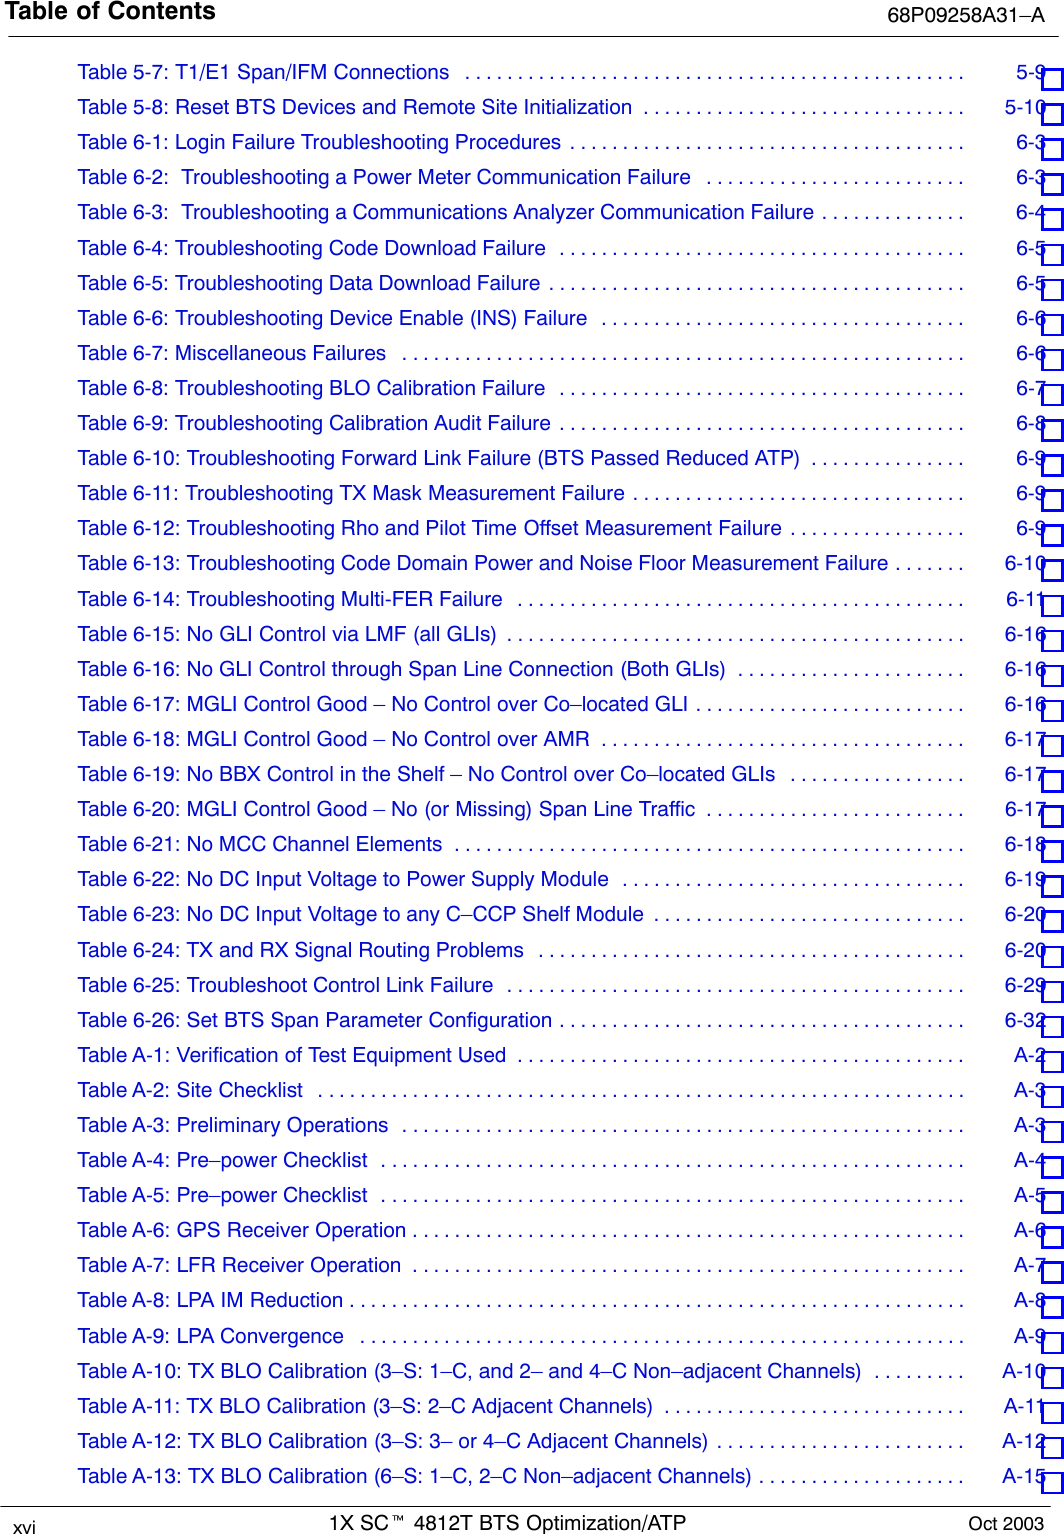 Table of Contents 68P09258A31–A1X SCt 4812T BTS Optimization/ATPxvi Oct 2003Table 5-7: T1/E1 Span/IFM Connections 5-9 . . . . . . . . . . . . . . . . . . . . . . . . . . . . . . . . . . . . . . . . . . . . . . . . Table 5-8: Reset BTS Devices and Remote Site Initialization 5-10 . . . . . . . . . . . . . . . . . . . . . . . . . . . . . . . Table 6-1: Login Failure Troubleshooting Procedures 6-3 . . . . . . . . . . . . . . . . . . . . . . . . . . . . . . . . . . . . . . Table 6-2:  Troubleshooting a Power Meter Communication Failure 6-3 . . . . . . . . . . . . . . . . . . . . . . . . . Table 6-3:  Troubleshooting a Communications Analyzer Communication Failure 6-4 . . . . . . . . . . . . . . Table 6-4: Troubleshooting Code Download Failure 6-5 . . . . . . . . . . . . . . . . . . . . . . . . . . . . . . . . . . . . . . . Table 6-5: Troubleshooting Data Download Failure 6-5 . . . . . . . . . . . . . . . . . . . . . . . . . . . . . . . . . . . . . . . . Table 6-6: Troubleshooting Device Enable (INS) Failure 6-6 . . . . . . . . . . . . . . . . . . . . . . . . . . . . . . . . . . . Table 6-7: Miscellaneous Failures 6-6 . . . . . . . . . . . . . . . . . . . . . . . . . . . . . . . . . . . . . . . . . . . . . . . . . . . . . . Table 6-8: Troubleshooting BLO Calibration Failure 6-7 . . . . . . . . . . . . . . . . . . . . . . . . . . . . . . . . . . . . . . . Table 6-9: Troubleshooting Calibration Audit Failure 6-8 . . . . . . . . . . . . . . . . . . . . . . . . . . . . . . . . . . . . . . . Table 6-10: Troubleshooting Forward Link Failure (BTS Passed Reduced ATP) 6-9 . . . . . . . . . . . . . . . Table 6-11: Troubleshooting TX Mask Measurement Failure 6-9 . . . . . . . . . . . . . . . . . . . . . . . . . . . . . . . . Table 6-12: Troubleshooting Rho and Pilot Time Offset Measurement Failure 6-9 . . . . . . . . . . . . . . . . . Table 6-13: Troubleshooting Code Domain Power and Noise Floor Measurement Failure 6-10 . . . . . . . Table 6-14: Troubleshooting Multi-FER Failure 6-11 . . . . . . . . . . . . . . . . . . . . . . . . . . . . . . . . . . . . . . . . . . . Table 6-15: No GLI Control via LMF (all GLIs) 6-16 . . . . . . . . . . . . . . . . . . . . . . . . . . . . . . . . . . . . . . . . . . . . Table 6-16: No GLI Control through Span Line Connection (Both GLIs) 6-16 . . . . . . . . . . . . . . . . . . . . . . Table 6-17: MGLI Control Good – No Control over Co–located GLI 6-16 . . . . . . . . . . . . . . . . . . . . . . . . . . Table 6-18: MGLI Control Good – No Control over AMR 6-17 . . . . . . . . . . . . . . . . . . . . . . . . . . . . . . . . . . . Table 6-19: No BBX Control in the Shelf – No Control over Co–located GLIs 6-17 . . . . . . . . . . . . . . . . . Table 6-20: MGLI Control Good – No (or Missing) Span Line Traffic 6-17 . . . . . . . . . . . . . . . . . . . . . . . . . Table 6-21: No MCC Channel Elements 6-18 . . . . . . . . . . . . . . . . . . . . . . . . . . . . . . . . . . . . . . . . . . . . . . . . . Table 6-22: No DC Input Voltage to Power Supply Module 6-19 . . . . . . . . . . . . . . . . . . . . . . . . . . . . . . . . . Table 6-23: No DC Input Voltage to any C–CCP Shelf Module 6-20 . . . . . . . . . . . . . . . . . . . . . . . . . . . . . . Table 6-24: TX and RX Signal Routing Problems 6-20 . . . . . . . . . . . . . . . . . . . . . . . . . . . . . . . . . . . . . . . . . Table 6-25: Troubleshoot Control Link Failure 6-29 . . . . . . . . . . . . . . . . . . . . . . . . . . . . . . . . . . . . . . . . . . . . Table 6-26: Set BTS Span Parameter Configuration 6-32 . . . . . . . . . . . . . . . . . . . . . . . . . . . . . . . . . . . . . . . Table A-1: Verification of Test Equipment Used A-2 . . . . . . . . . . . . . . . . . . . . . . . . . . . . . . . . . . . . . . . . . . . Table A-2: Site Checklist A-3 . . . . . . . . . . . . . . . . . . . . . . . . . . . . . . . . . . . . . . . . . . . . . . . . . . . . . . . . . . . . . . Table A-3: Preliminary Operations A-3 . . . . . . . . . . . . . . . . . . . . . . . . . . . . . . . . . . . . . . . . . . . . . . . . . . . . . . Table A-4: Pre–power Checklist A-4 . . . . . . . . . . . . . . . . . . . . . . . . . . . . . . . . . . . . . . . . . . . . . . . . . . . . . . . . Table A-5: Pre–power Checklist A-5 . . . . . . . . . . . . . . . . . . . . . . . . . . . . . . . . . . . . . . . . . . . . . . . . . . . . . . . . Table A-6: GPS Receiver Operation A-6 . . . . . . . . . . . . . . . . . . . . . . . . . . . . . . . . . . . . . . . . . . . . . . . . . . . . . Table A-7: LFR Receiver Operation A-7 . . . . . . . . . . . . . . . . . . . . . . . . . . . . . . . . . . . . . . . . . . . . . . . . . . . . . Table A-8: LPA IM Reduction A-8 . . . . . . . . . . . . . . . . . . . . . . . . . . . . . . . . . . . . . . . . . . . . . . . . . . . . . . . . . . . Table A-9: LPA Convergence A-9 . . . . . . . . . . . . . . . . . . . . . . . . . . . . . . . . . . . . . . . . . . . . . . . . . . . . . . . . . . Table A-10: TX BLO Calibration (3–S: 1–C, and 2– and 4–C Non–adjacent Channels) A-10 . . . . . . . . . Table A-11: TX BLO Calibration (3–S: 2–C Adjacent Channels) A-11 . . . . . . . . . . . . . . . . . . . . . . . . . . . . . Table A-12: TX BLO Calibration (3–S: 3– or 4–C Adjacent Channels) A-12 . . . . . . . . . . . . . . . . . . . . . . . . Table A-13: TX BLO Calibration (6–S: 1–C, 2–C Non–adjacent Channels) A-15 . . . . . . . . . . . . . . . . . . . . 